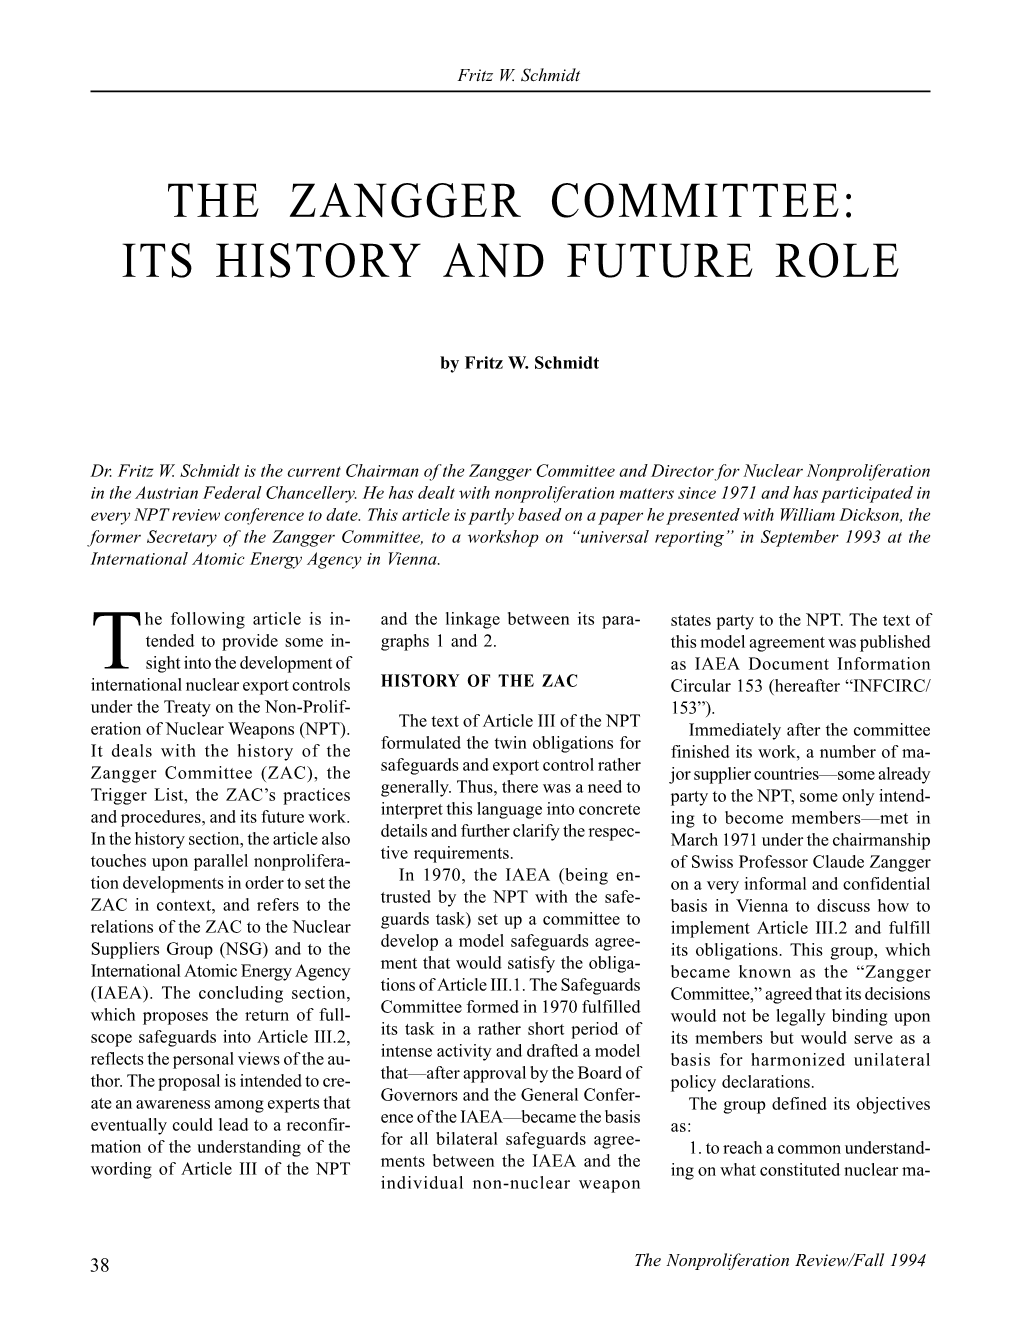 The Zangger Committee: Its History and Future Role